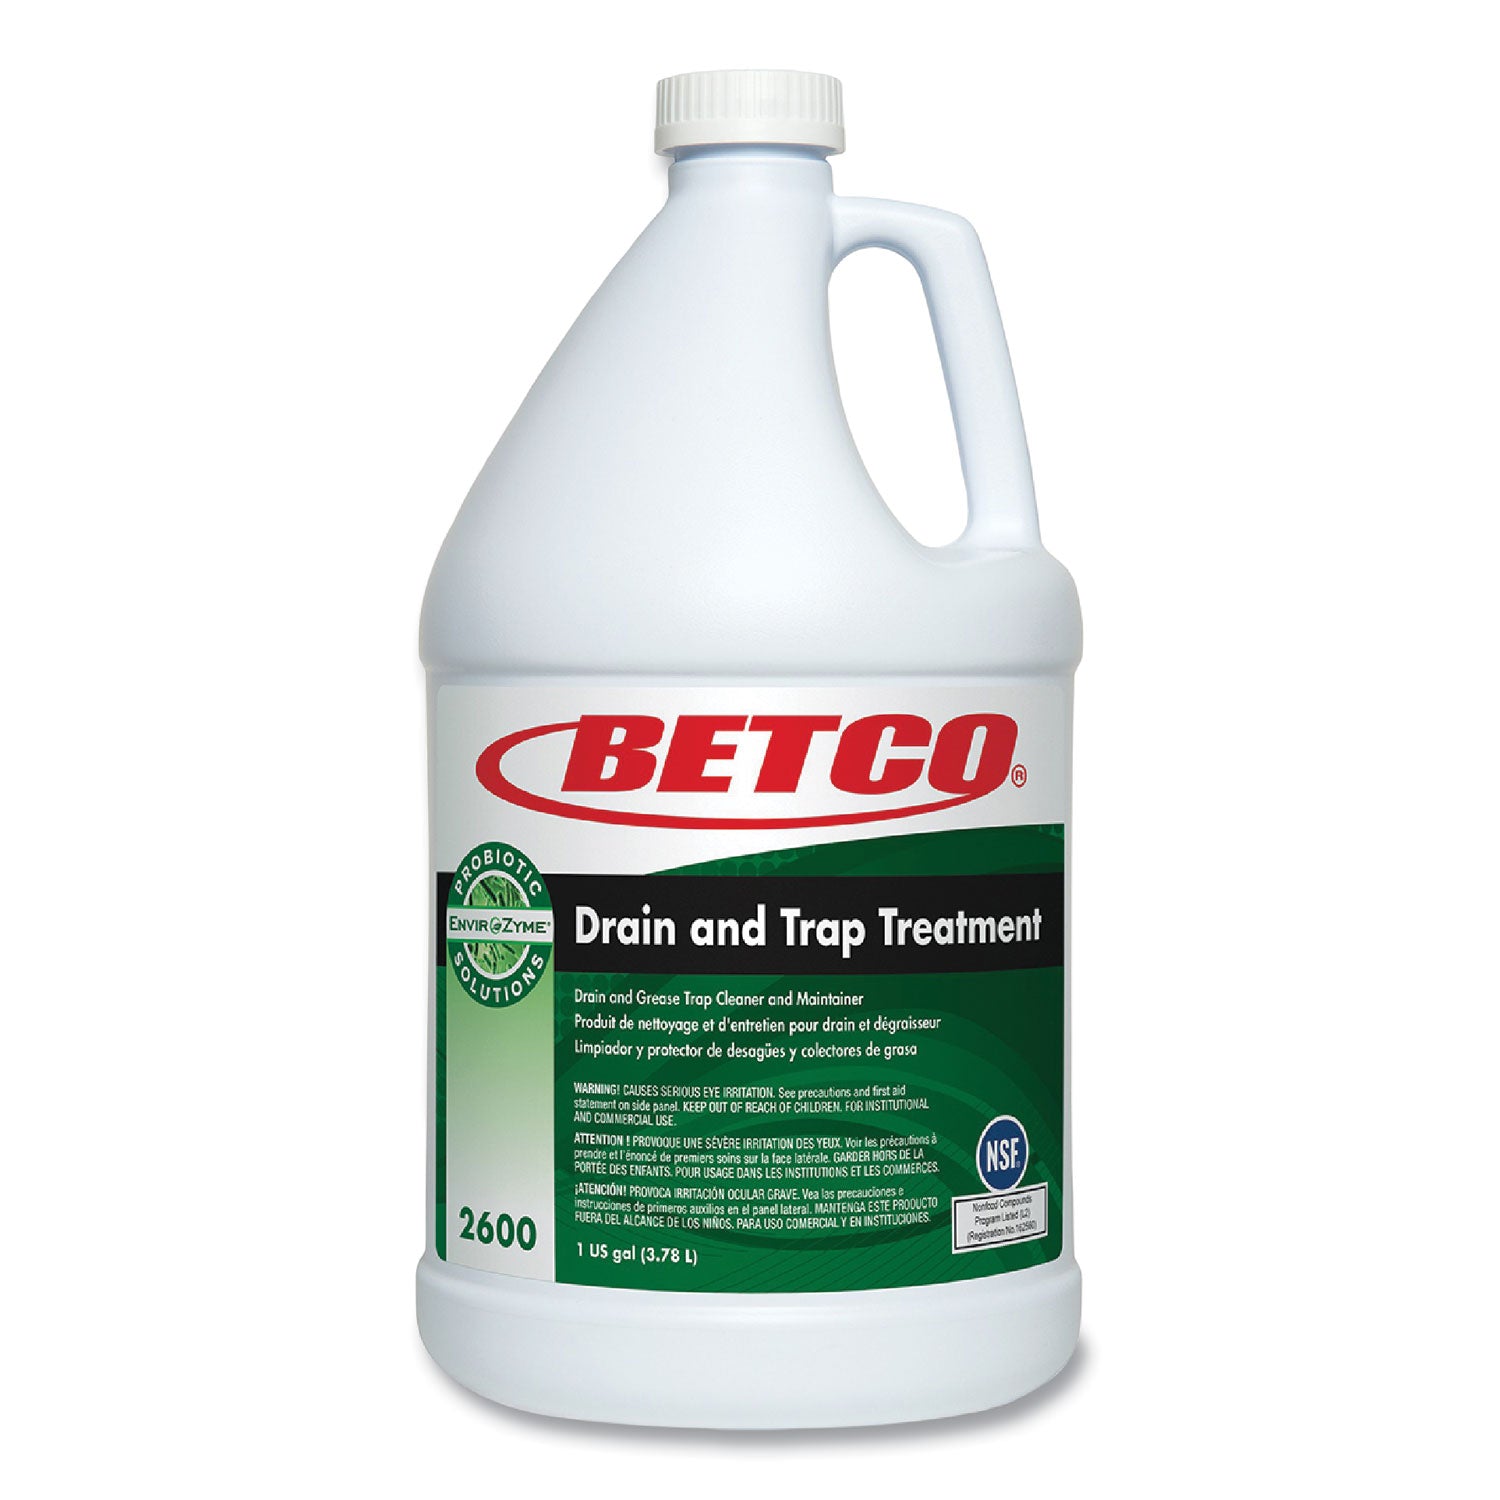 bioactive-solutions-drain-and-trap-treatment-ocean-scent-1-gal-bottle-4-carton_bet26000400 - 1